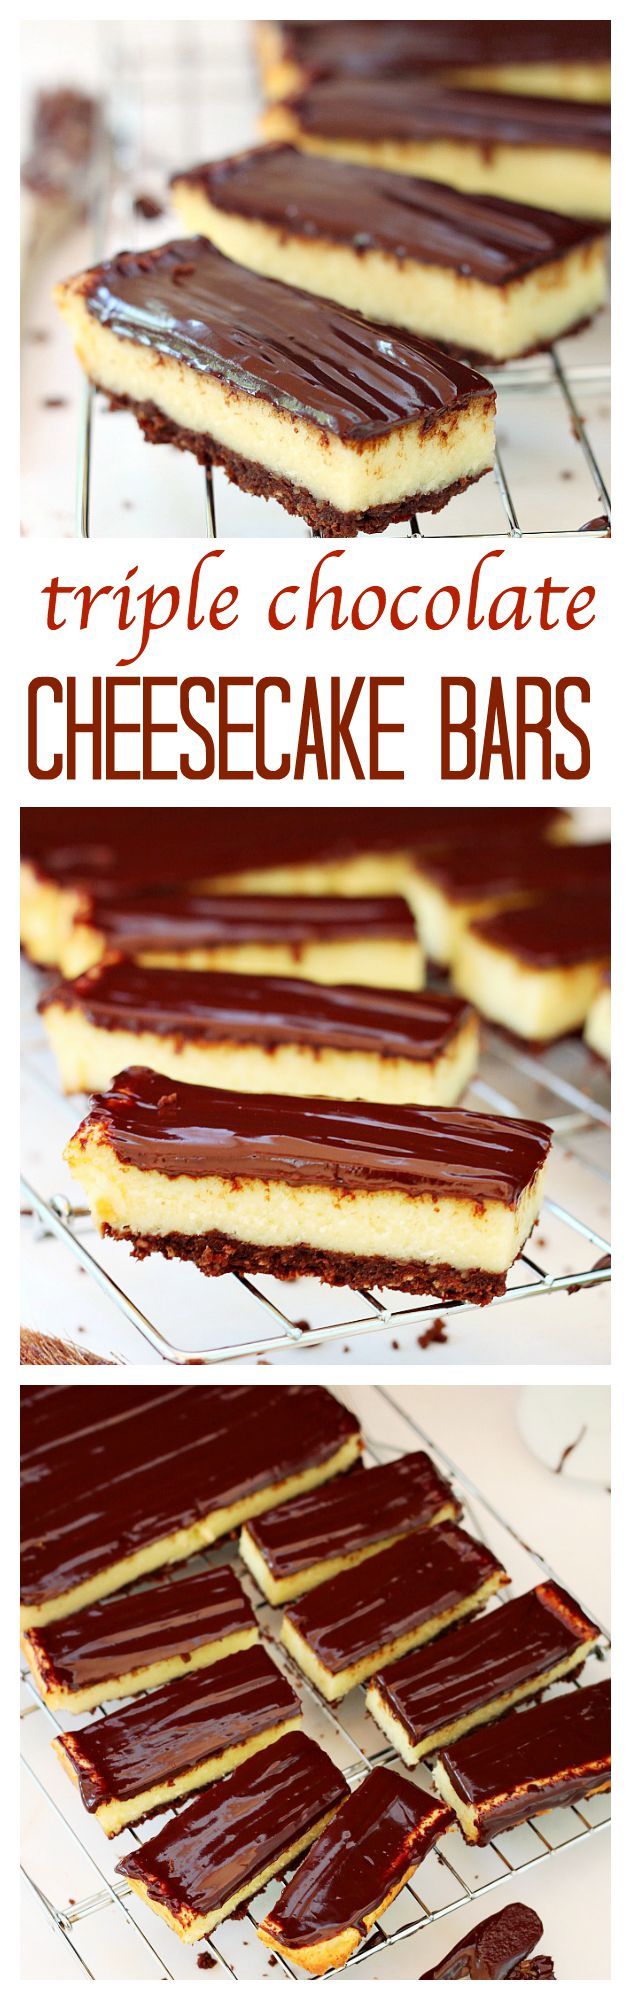 Classic chocolate cheesecake bars are taken to a whole new level. Creamy white chocolate cheesecake is sandwiched between a chocolate chip oreo crust and silky smooth chocolate ganache. It’s a triple chocolate deliciousness!